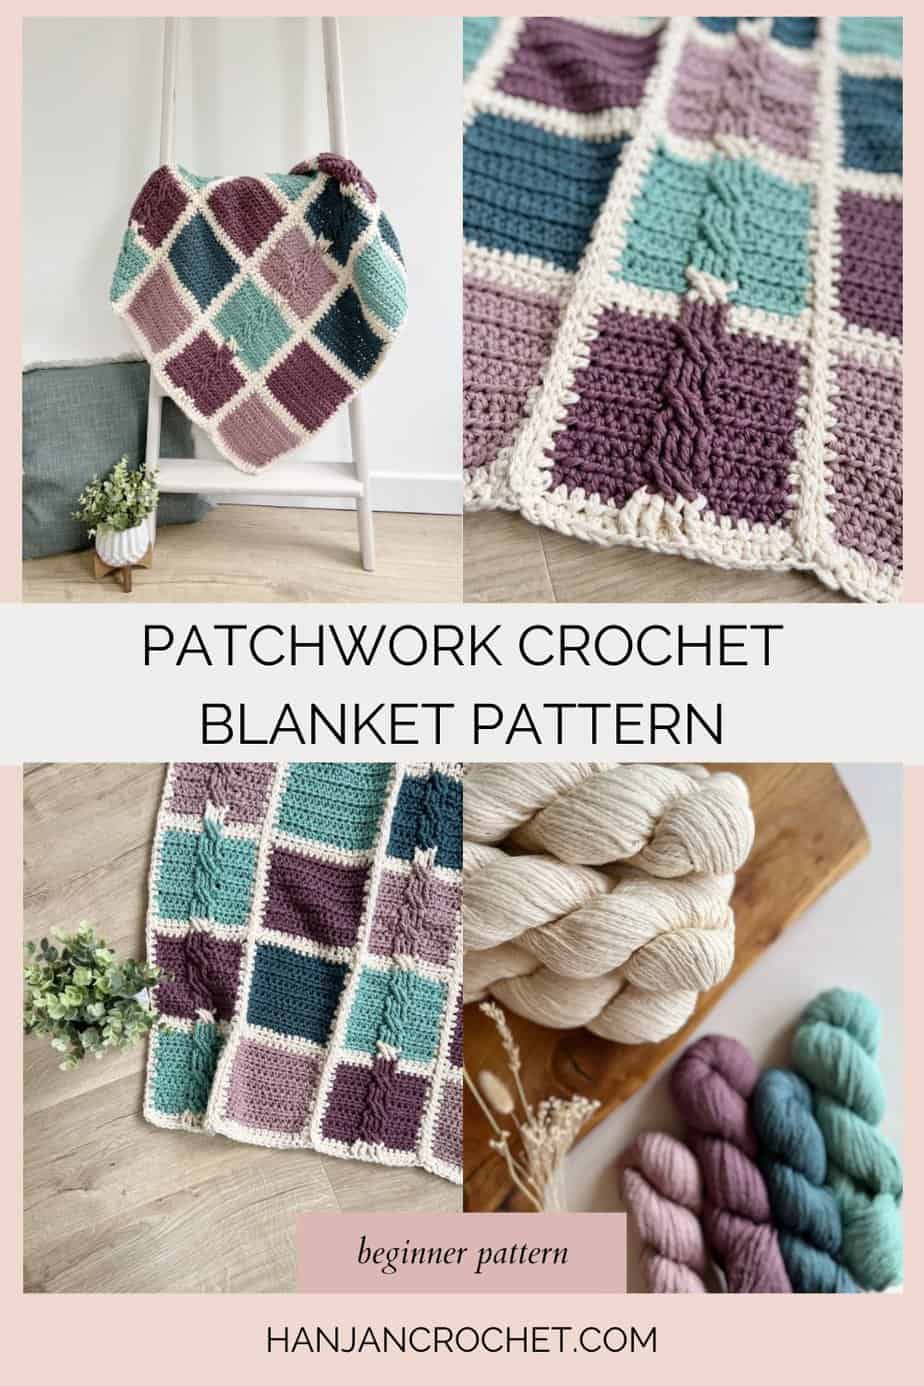 Four images of patchwork crochet blanket pattern with cable stitches.